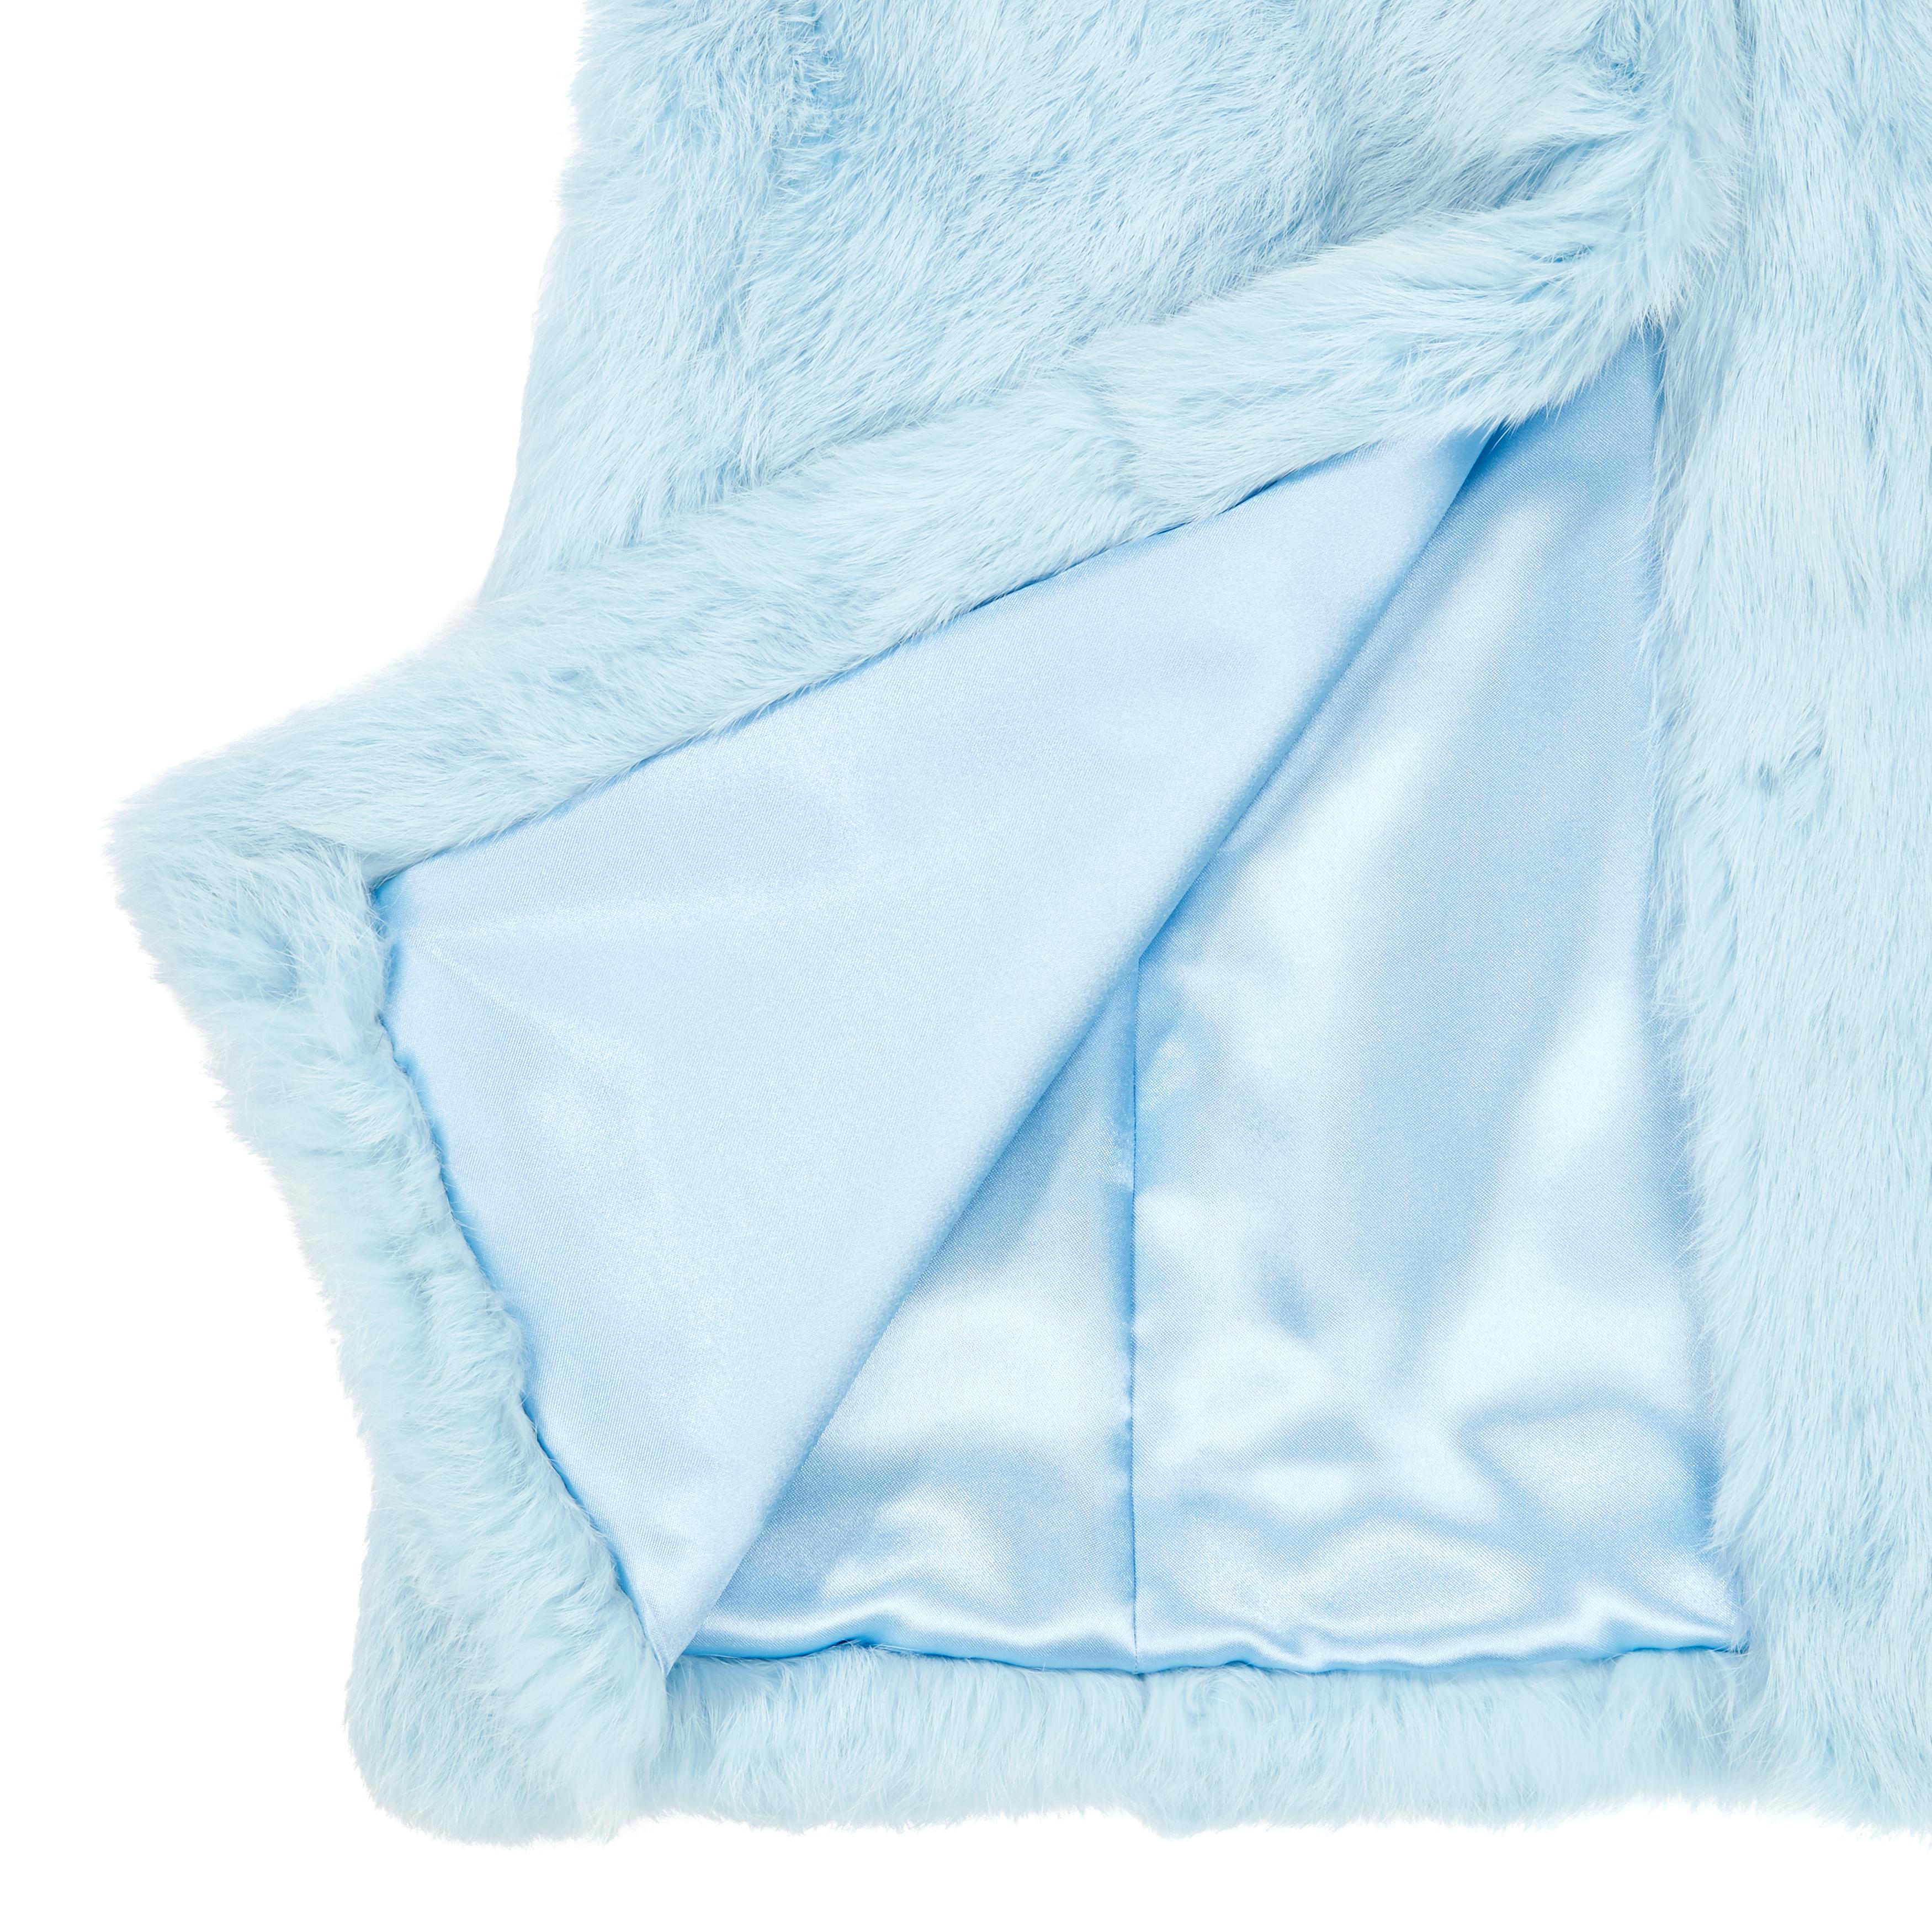 Verheyen London Nehru Gilet in Rabbit Fur in Iced Blue Topaz - Size Uk M

PRODUCT DETAILS - Brand New 
The Nehru gilet is Verheyen London’s casual design. The tailored statement gilet is perfect with a pair or jeans, and or over a jumper in the